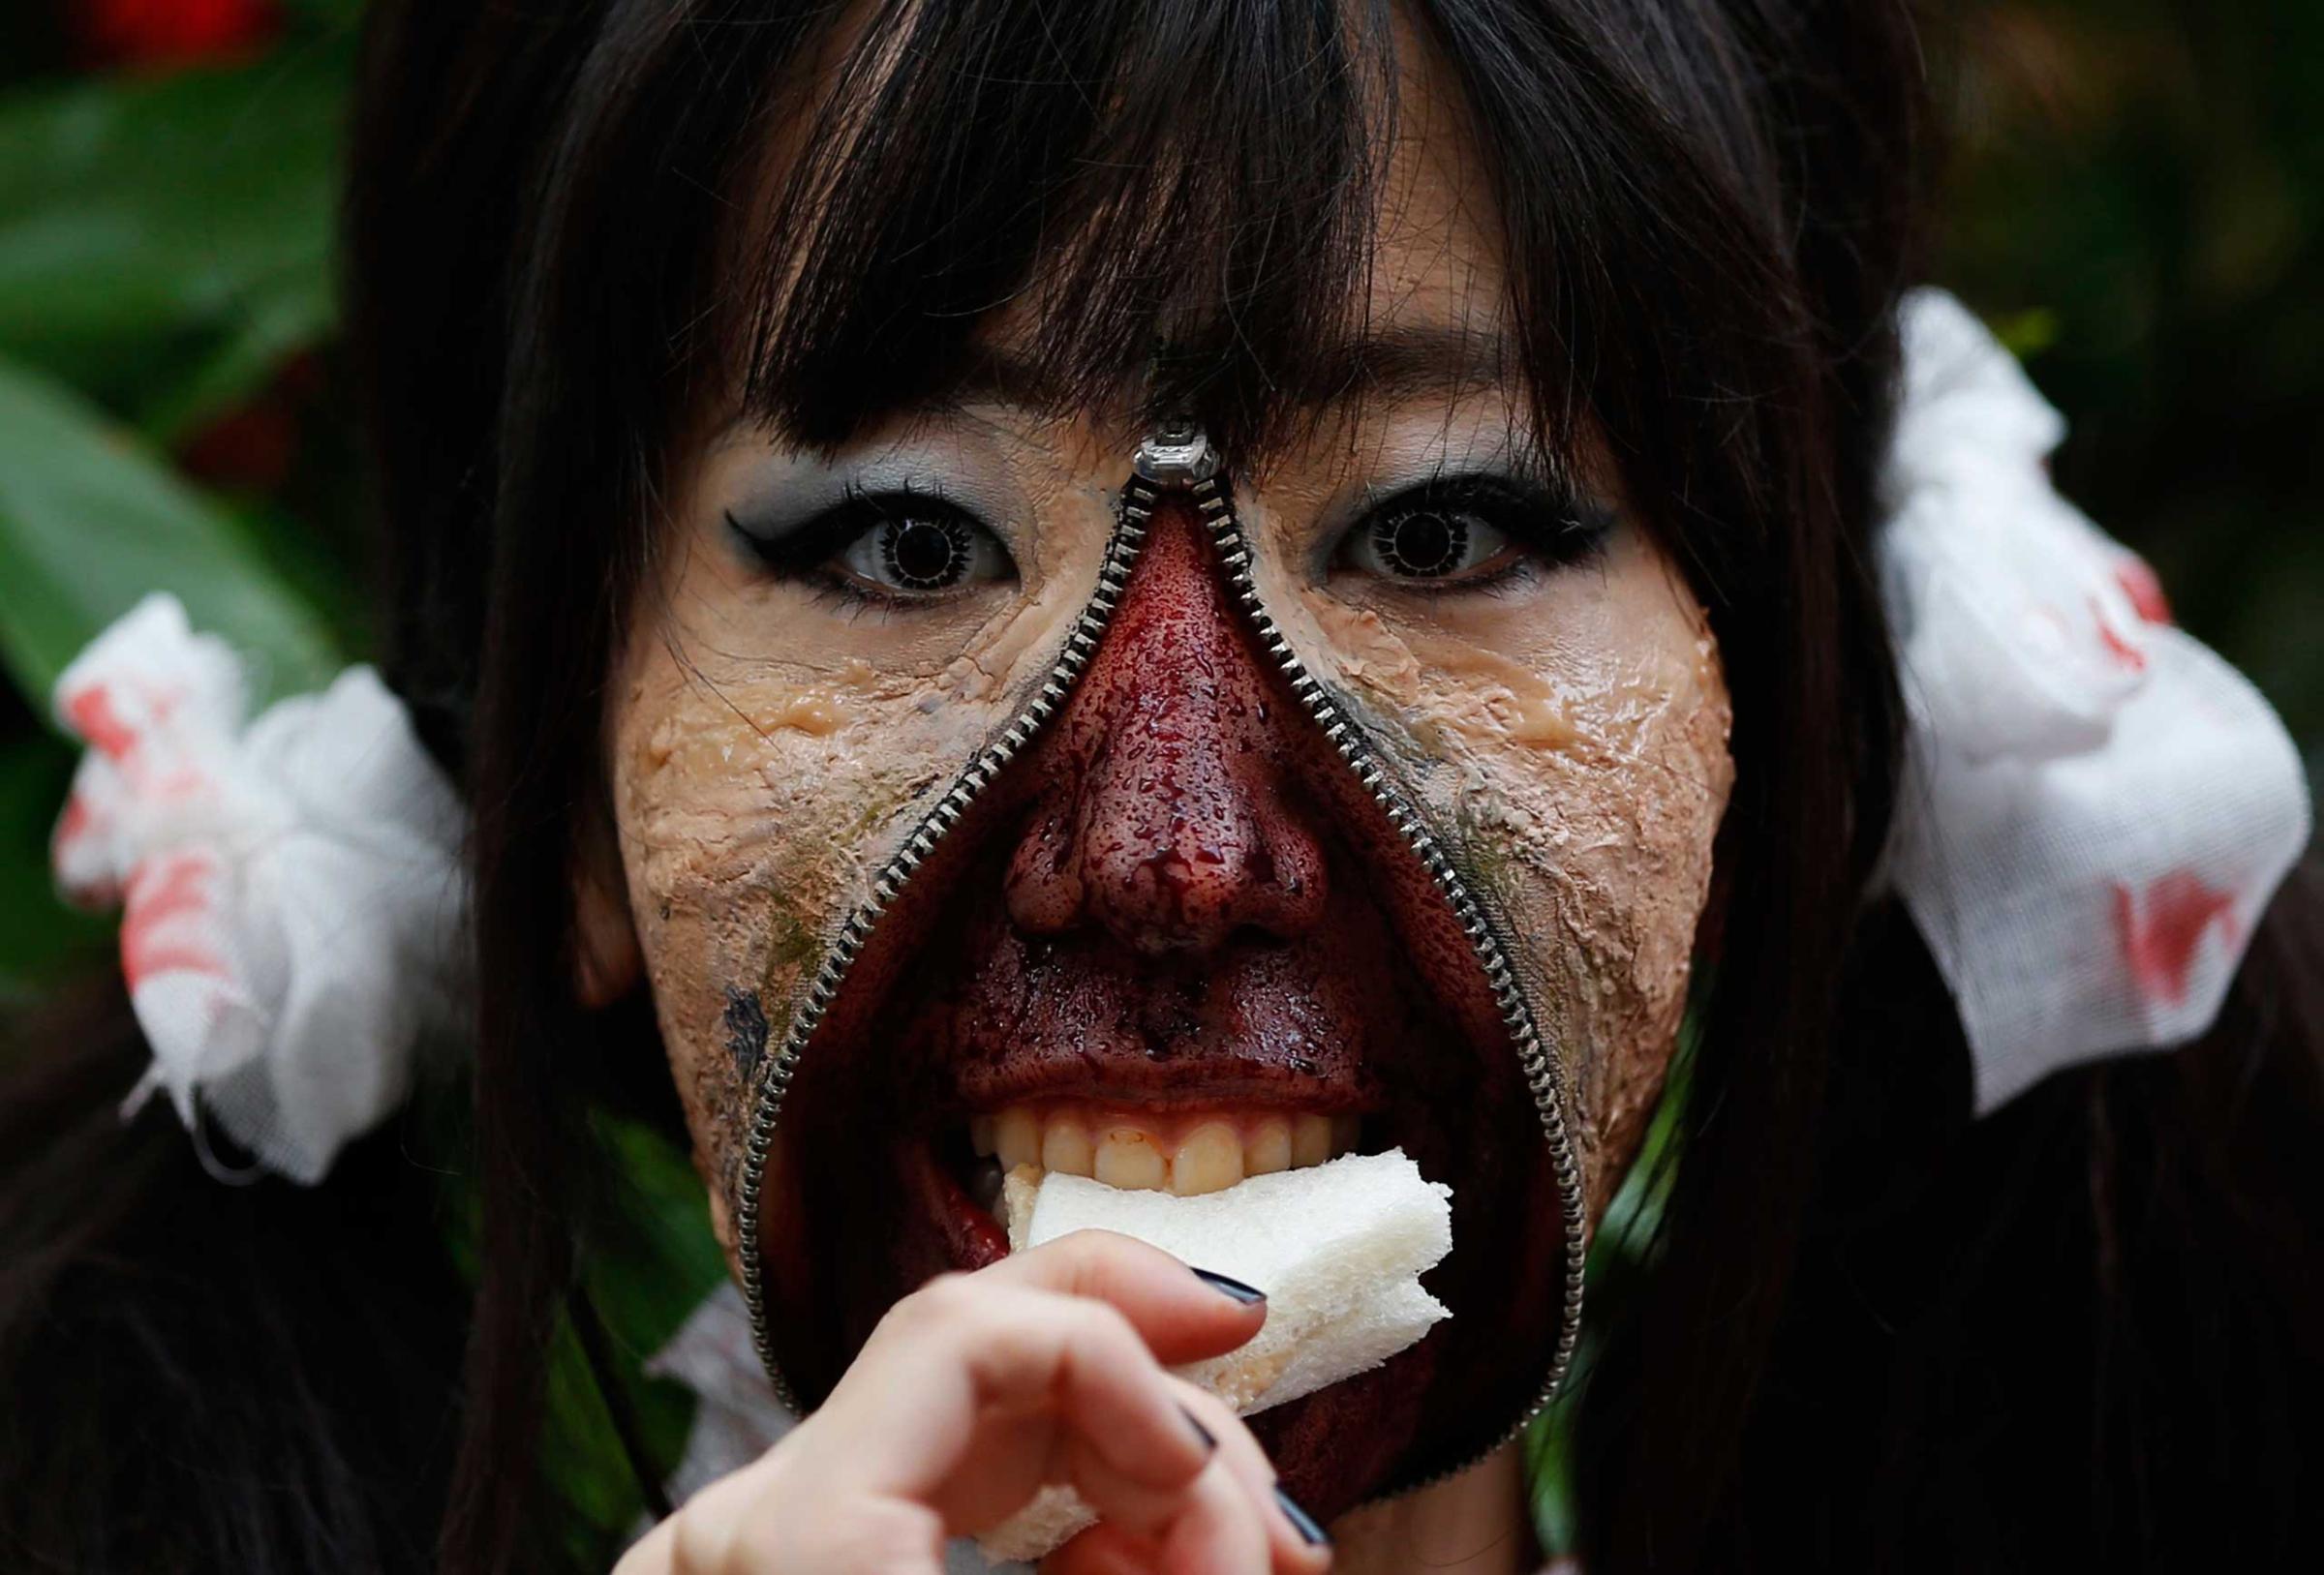 A participant in costume eats a sandwich after a Halloween parade in Kawasaki